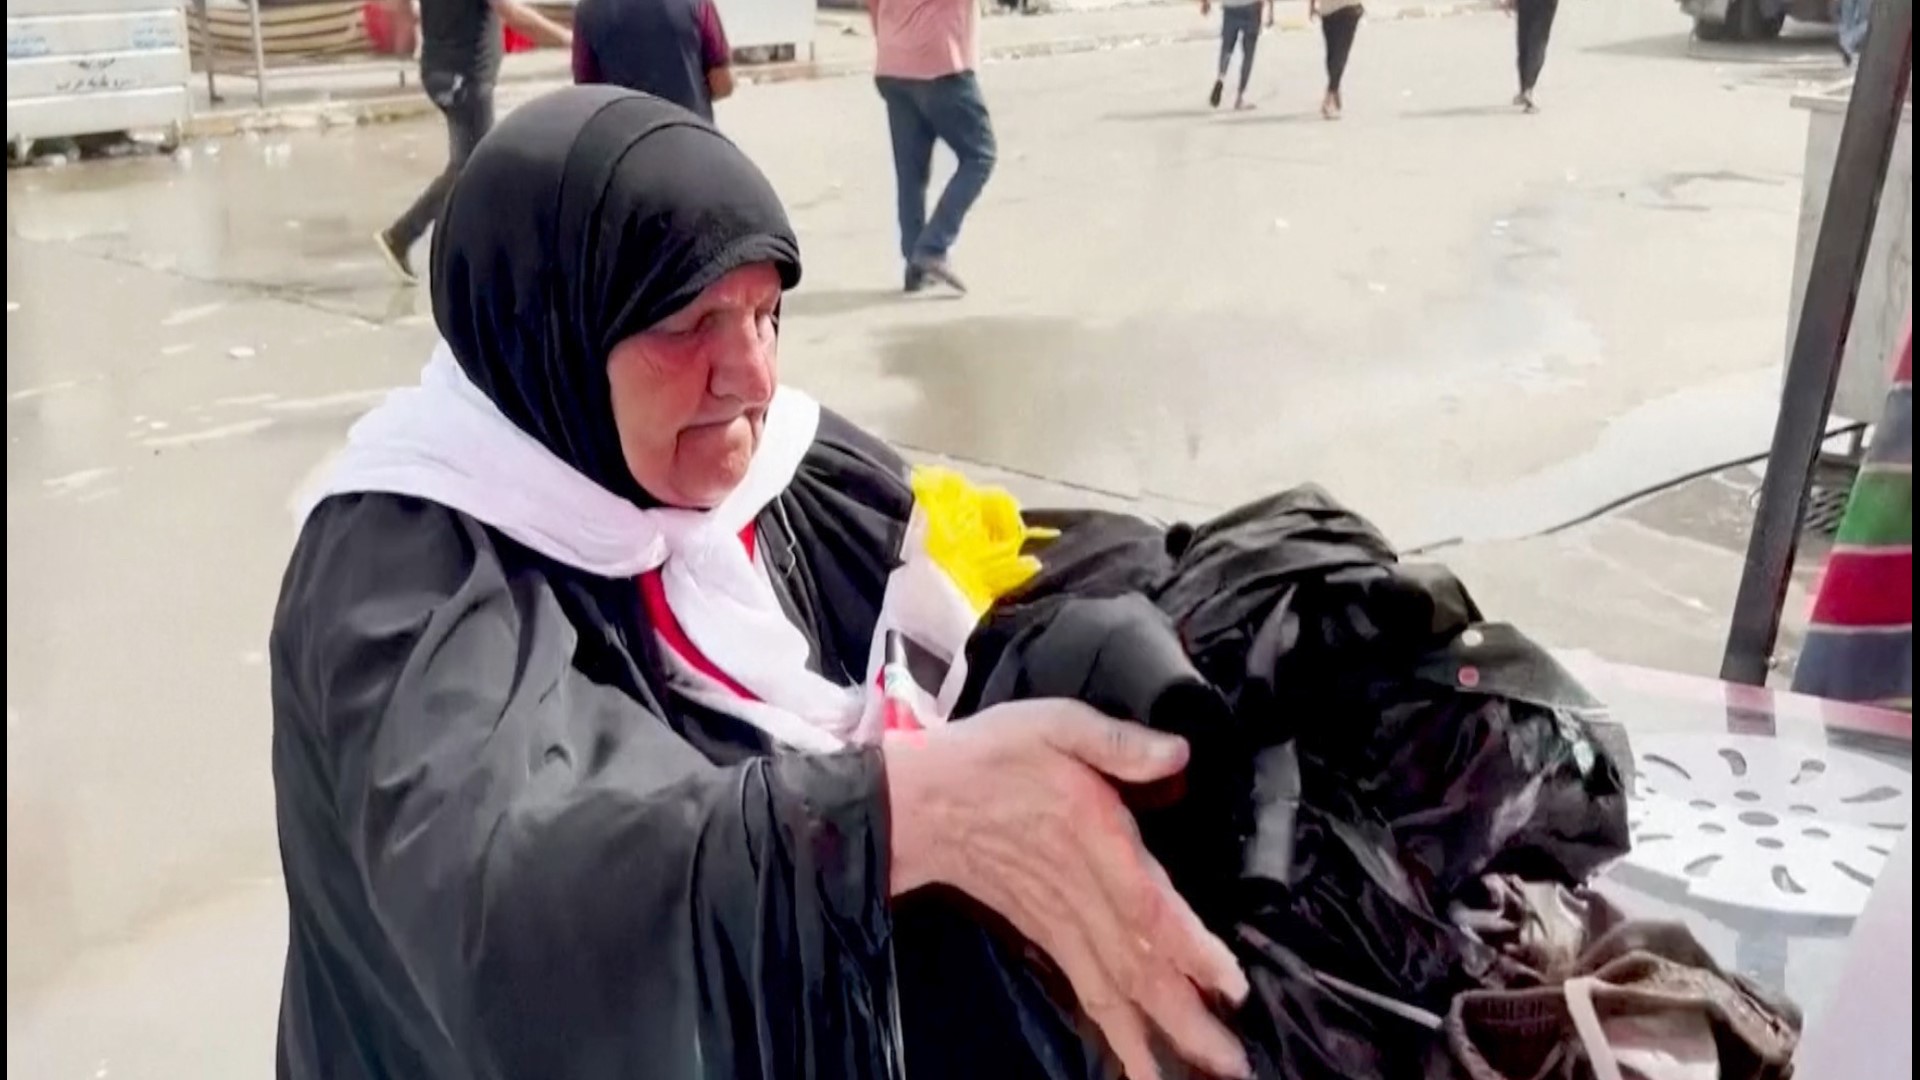 A 73-year-old woman is offering free laundry services to the participants of the Iraqi parliament protest. Veuer's Maria Mercedes Galuppo has the story.